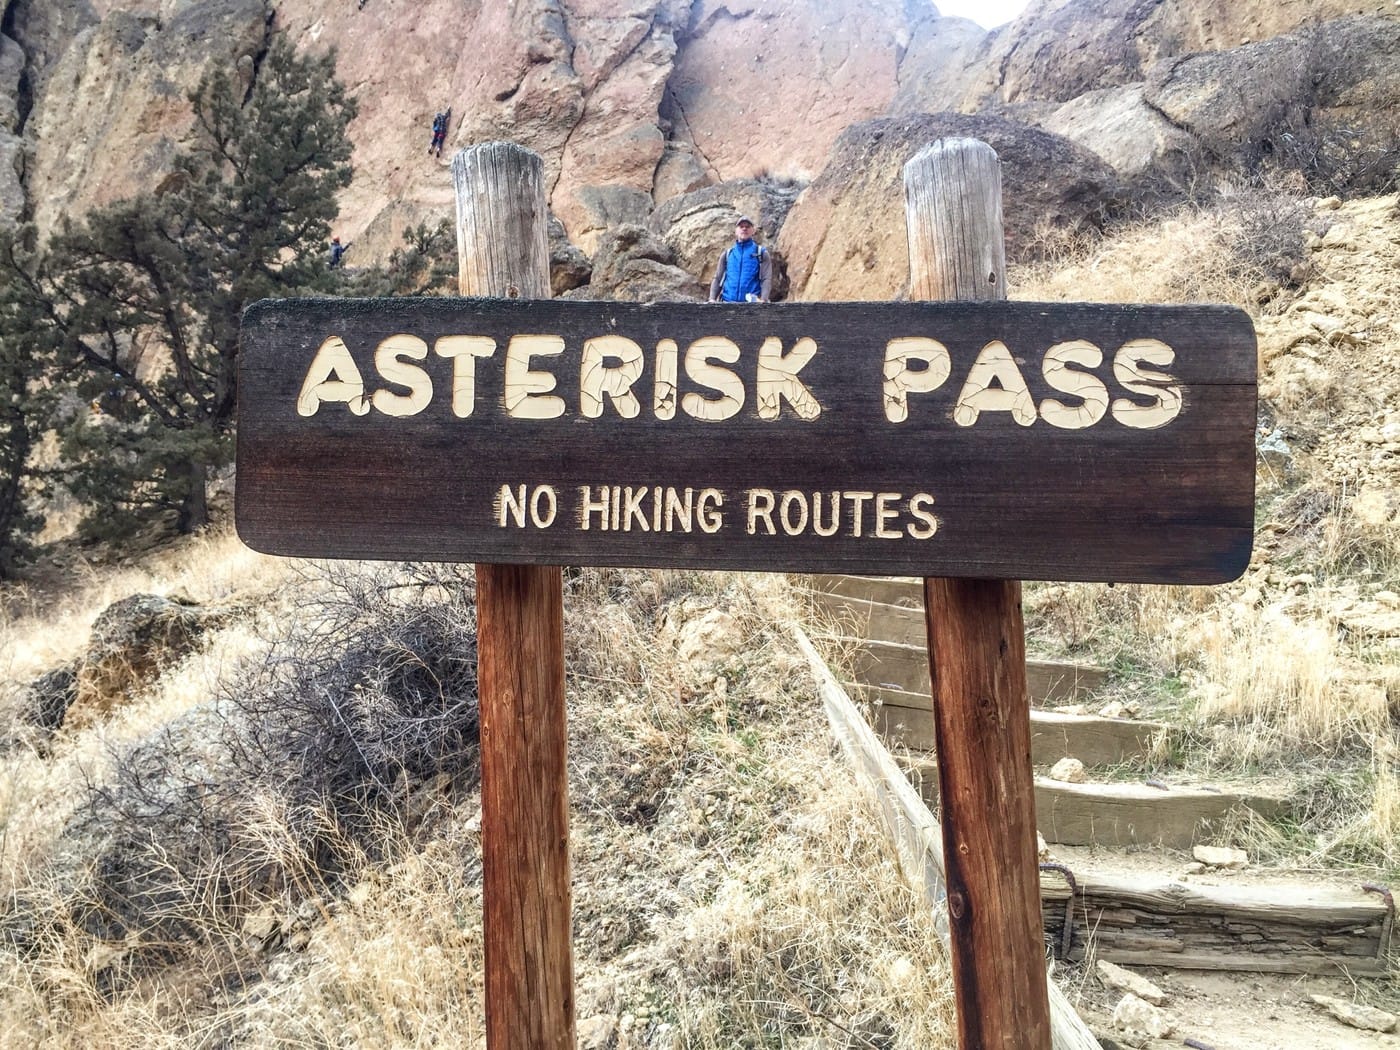 Trail sign at Asterisk Pass.